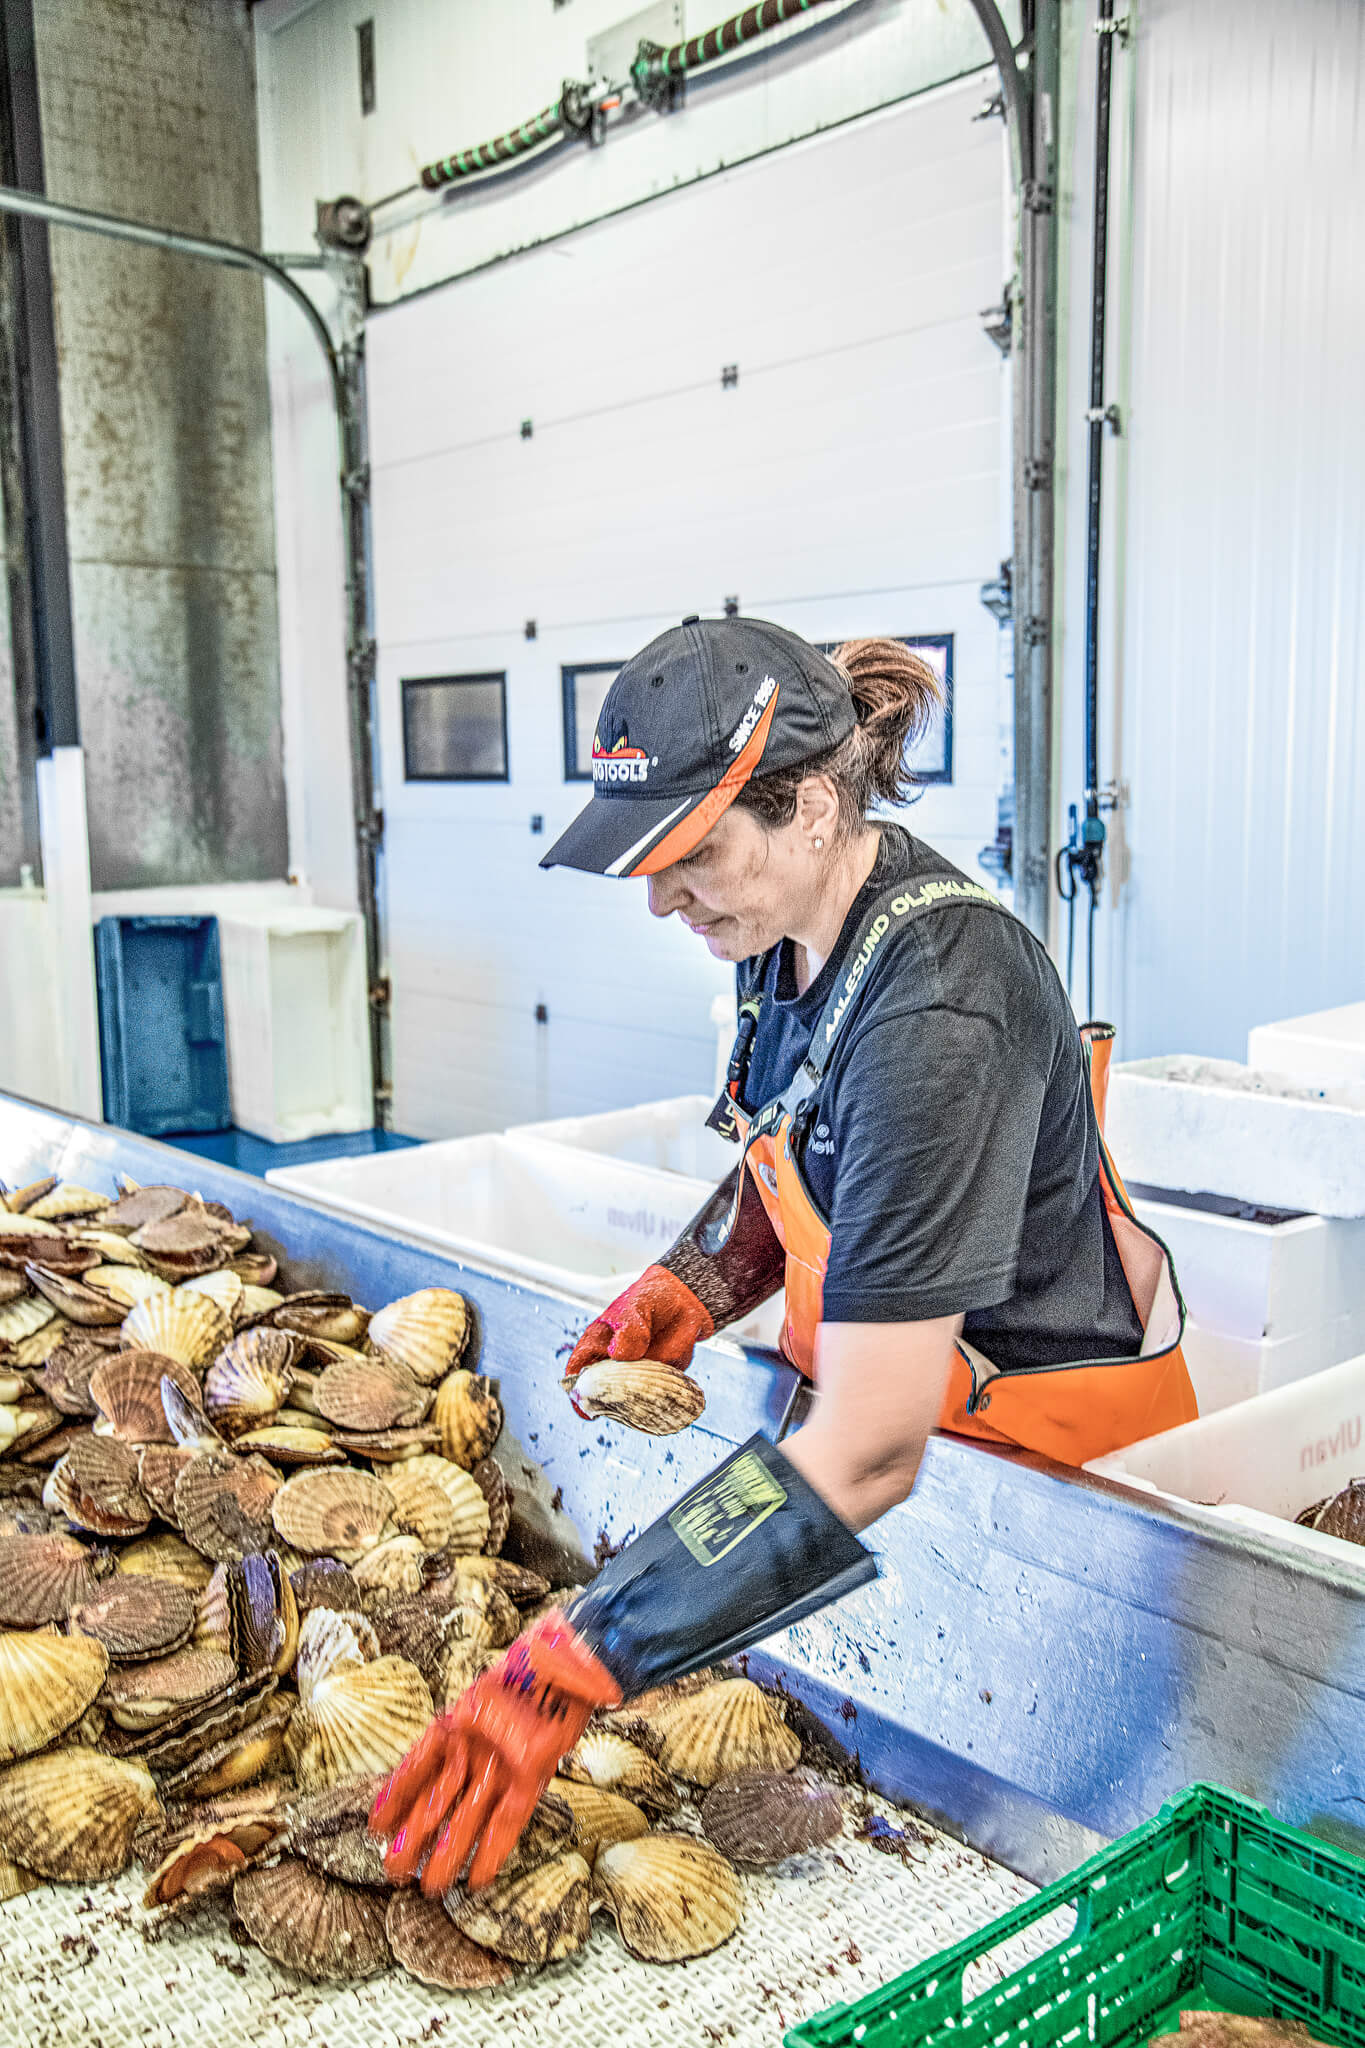 The freshly caught seafood is sorted by hand